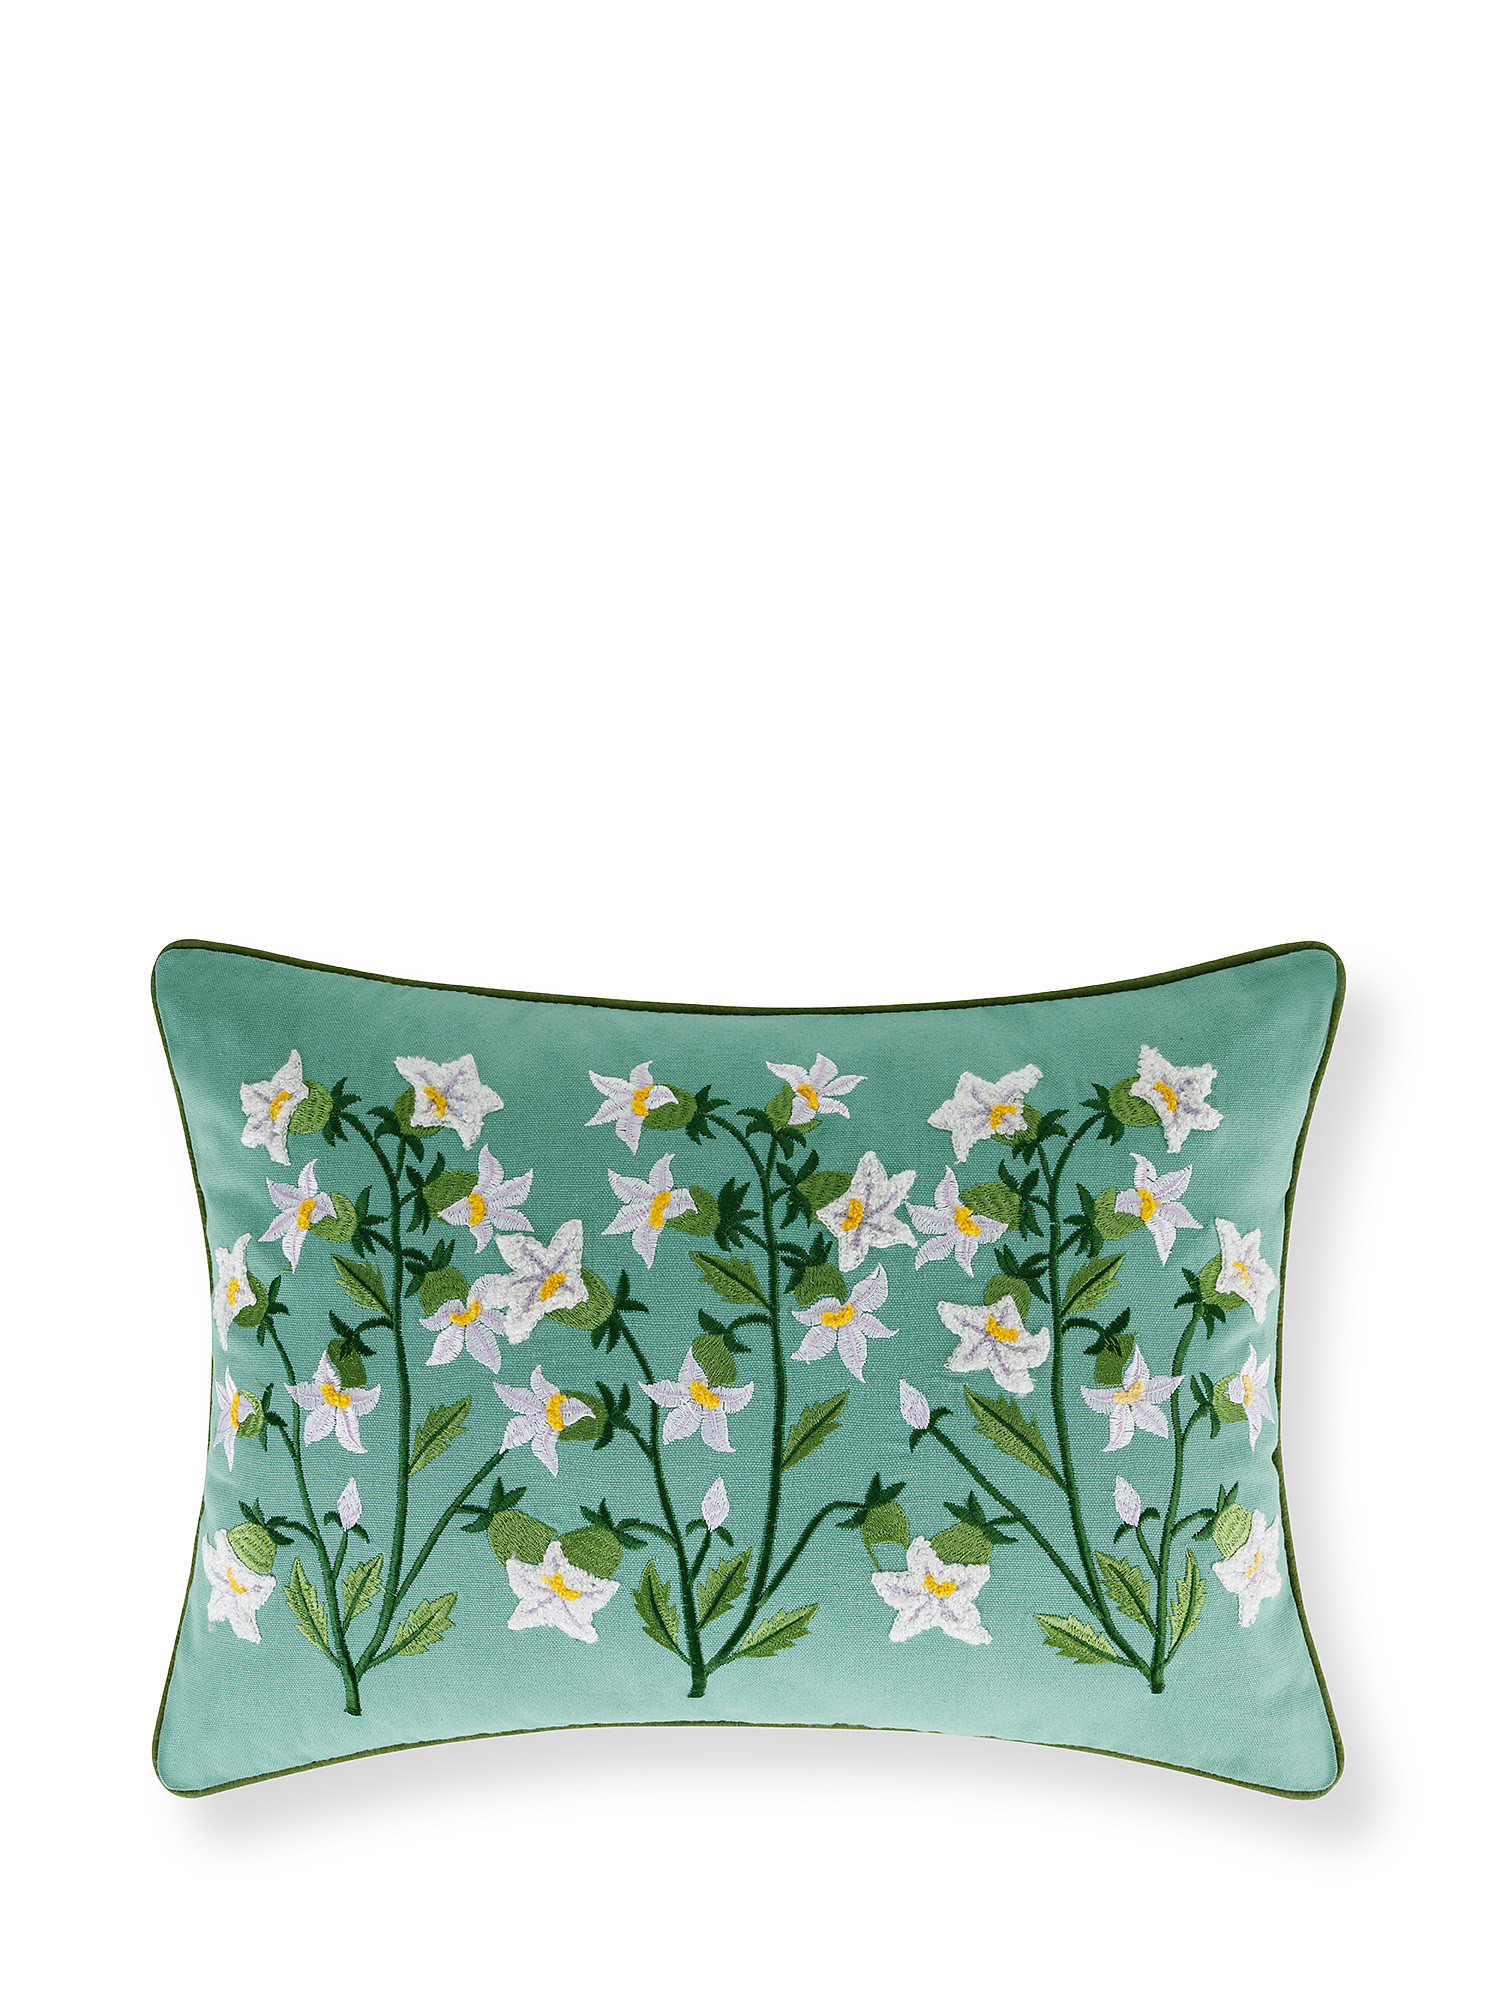 Floral embroidery cushion 35x50cm, Multicolor, large image number 0